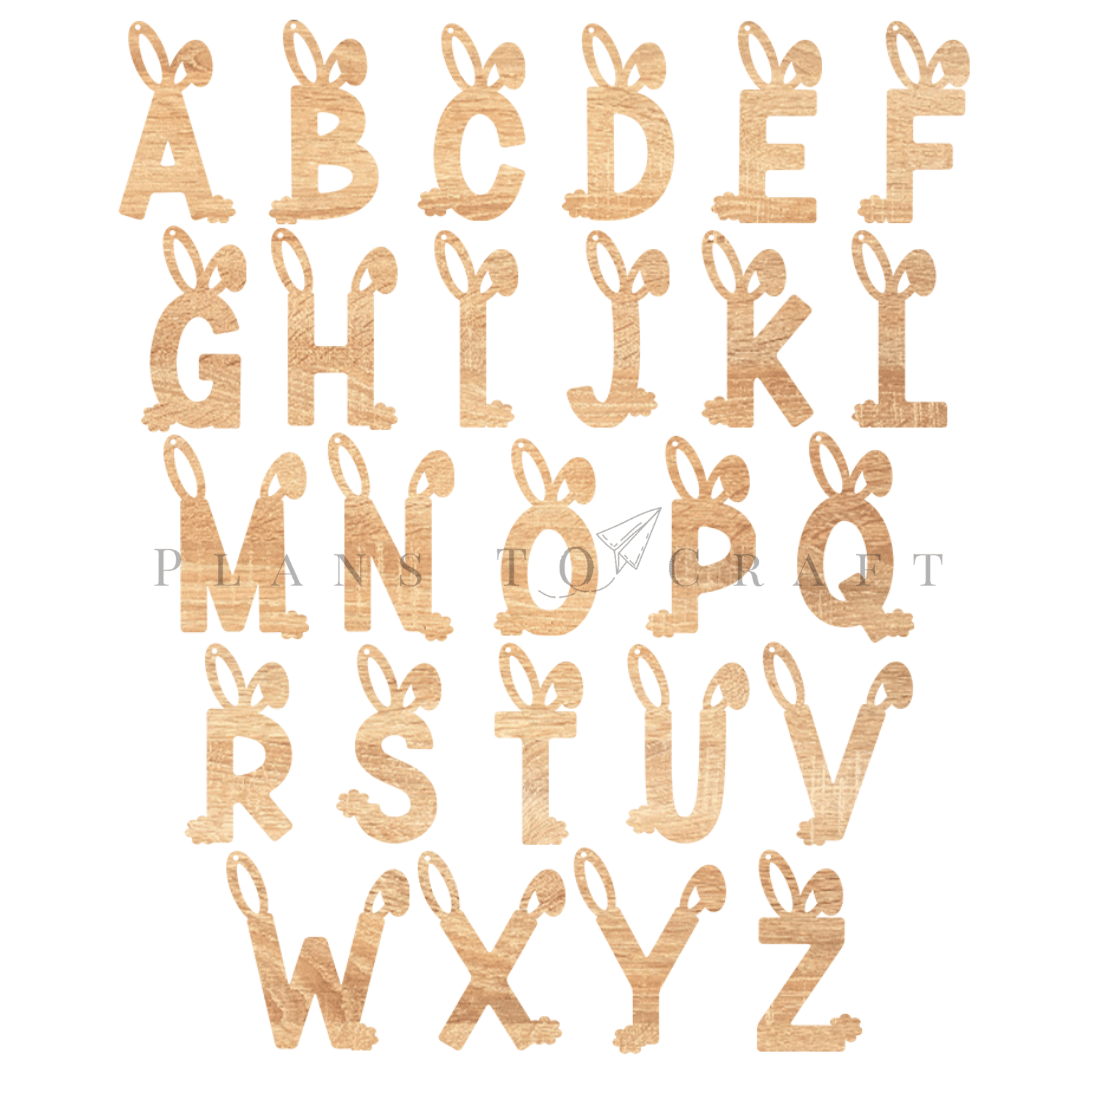 Set of letters and numbers made out of wood.